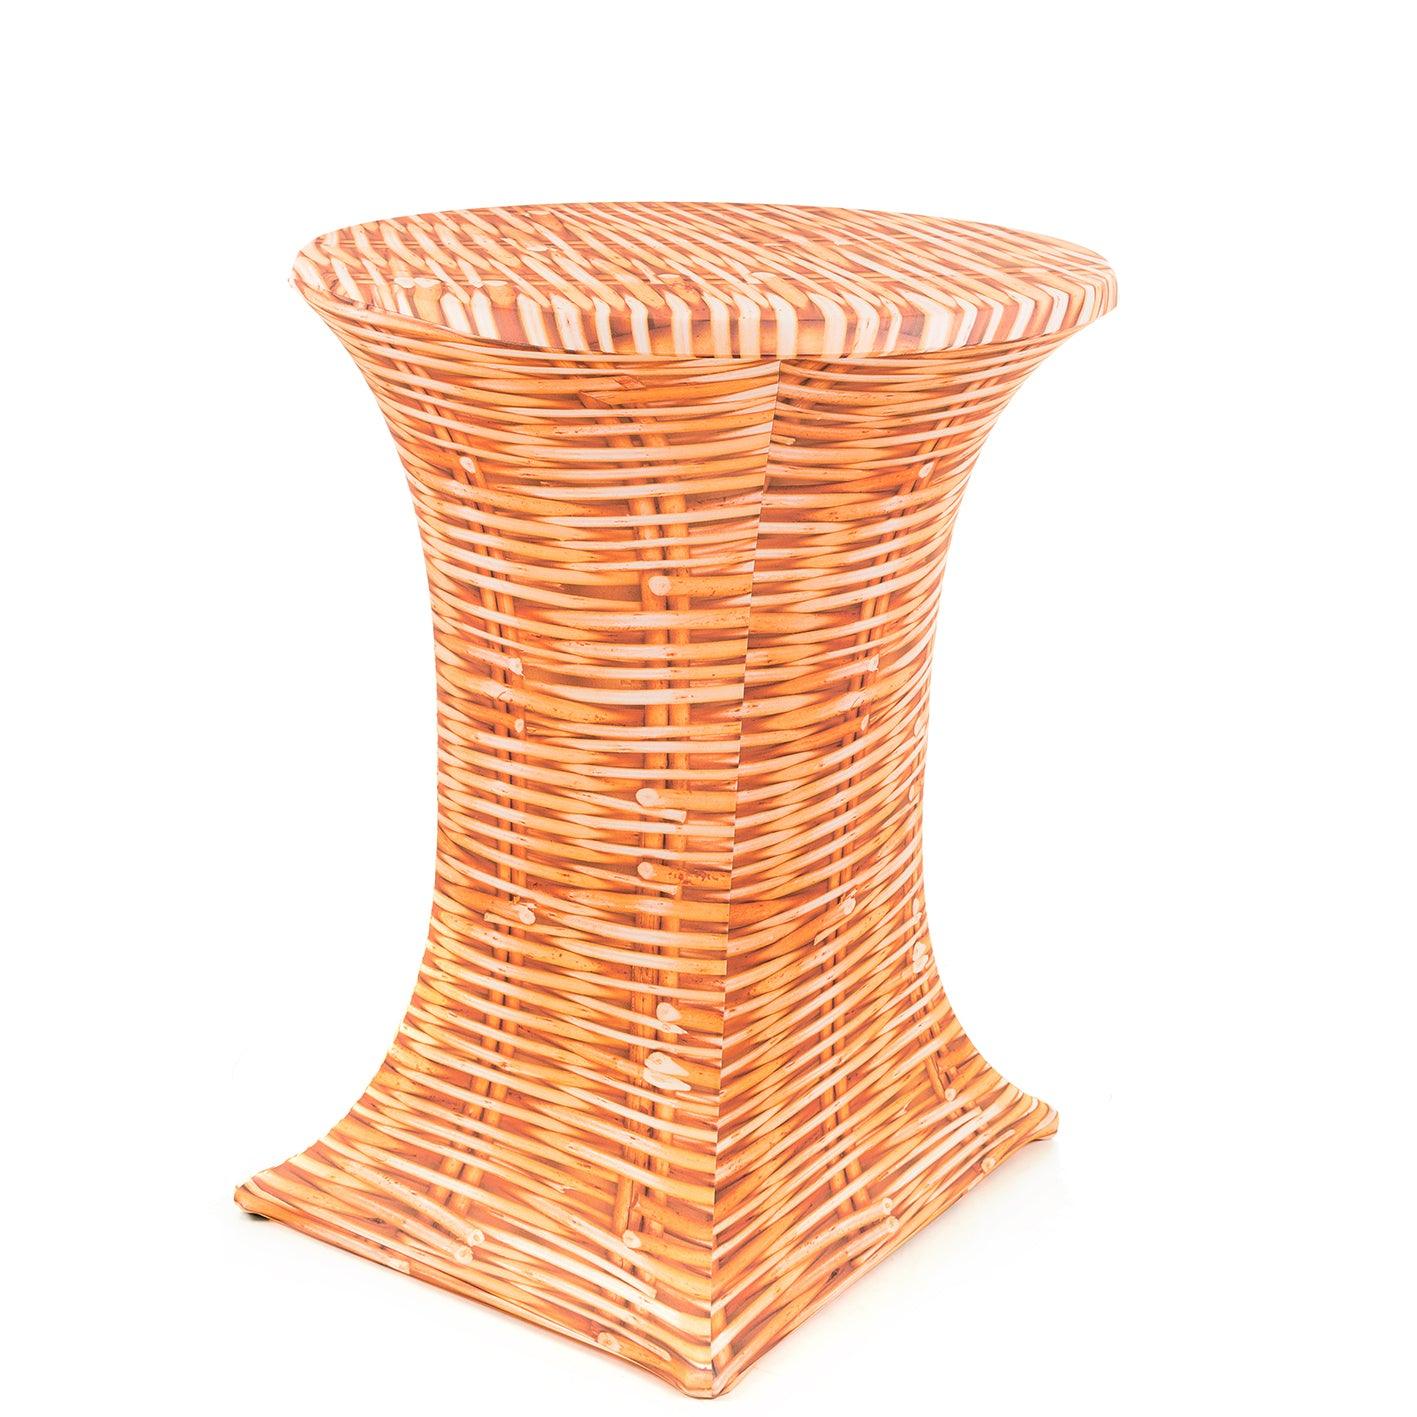 Standing Table Cover: Basket - Di-Jet nv - The Designer? YOU! 